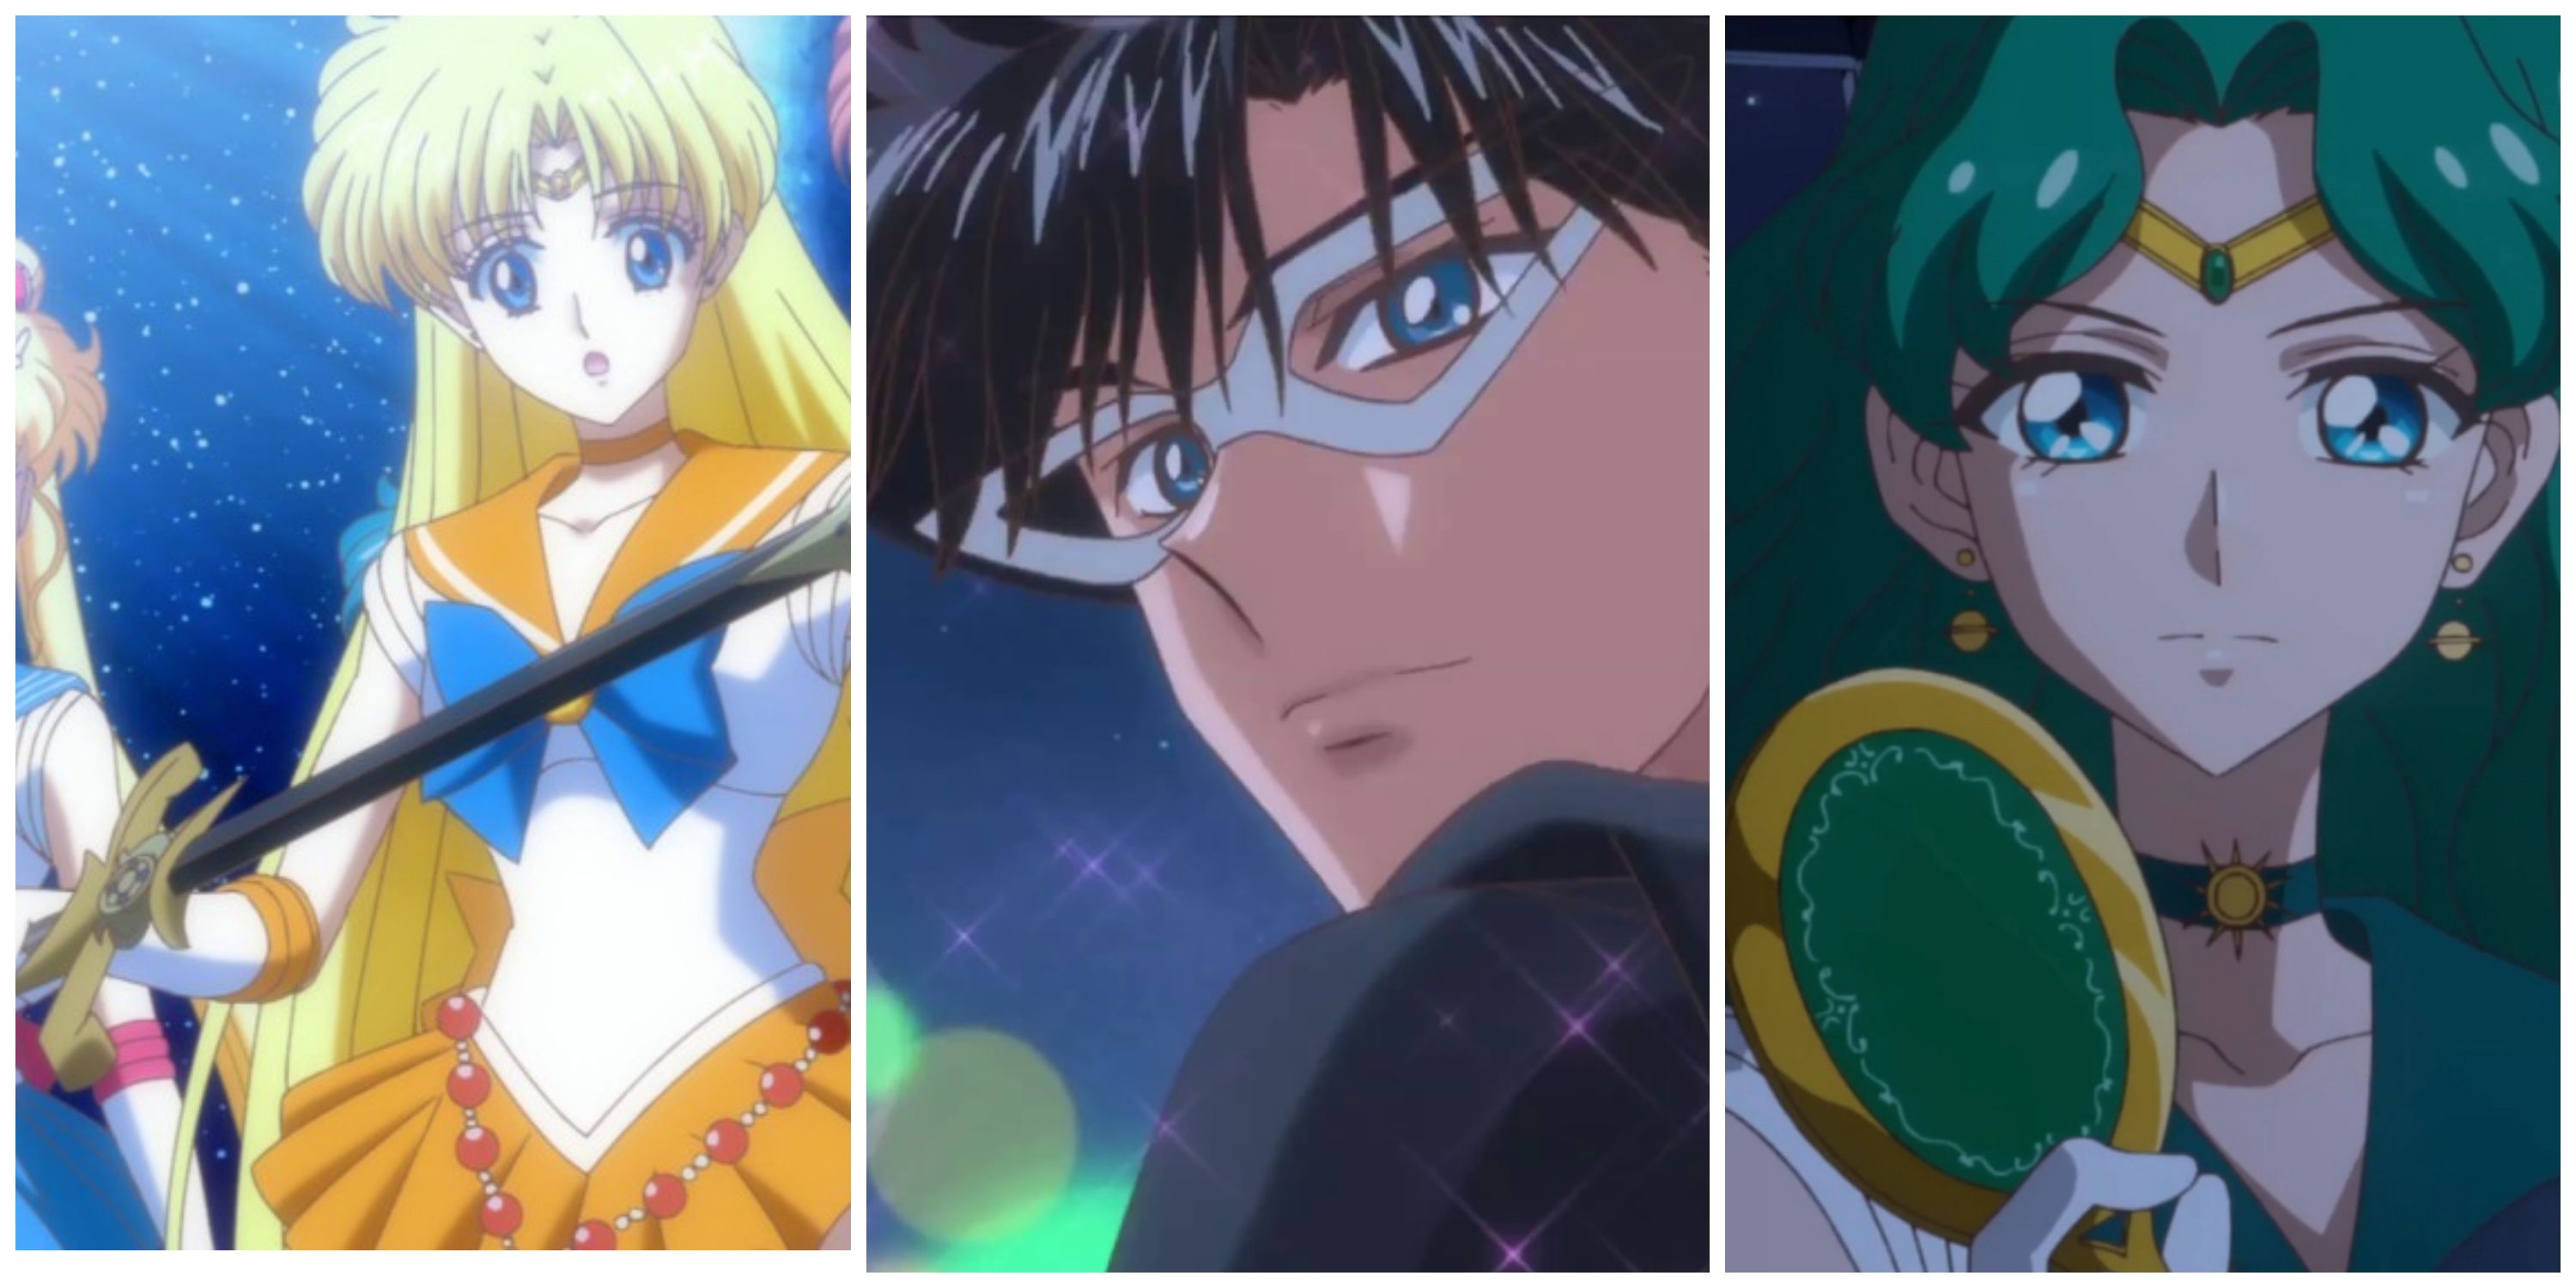 Sailor Venus, Tuxedo Mask, and Sailor Neptune holding her mirror in Sailor Moon Crystal.